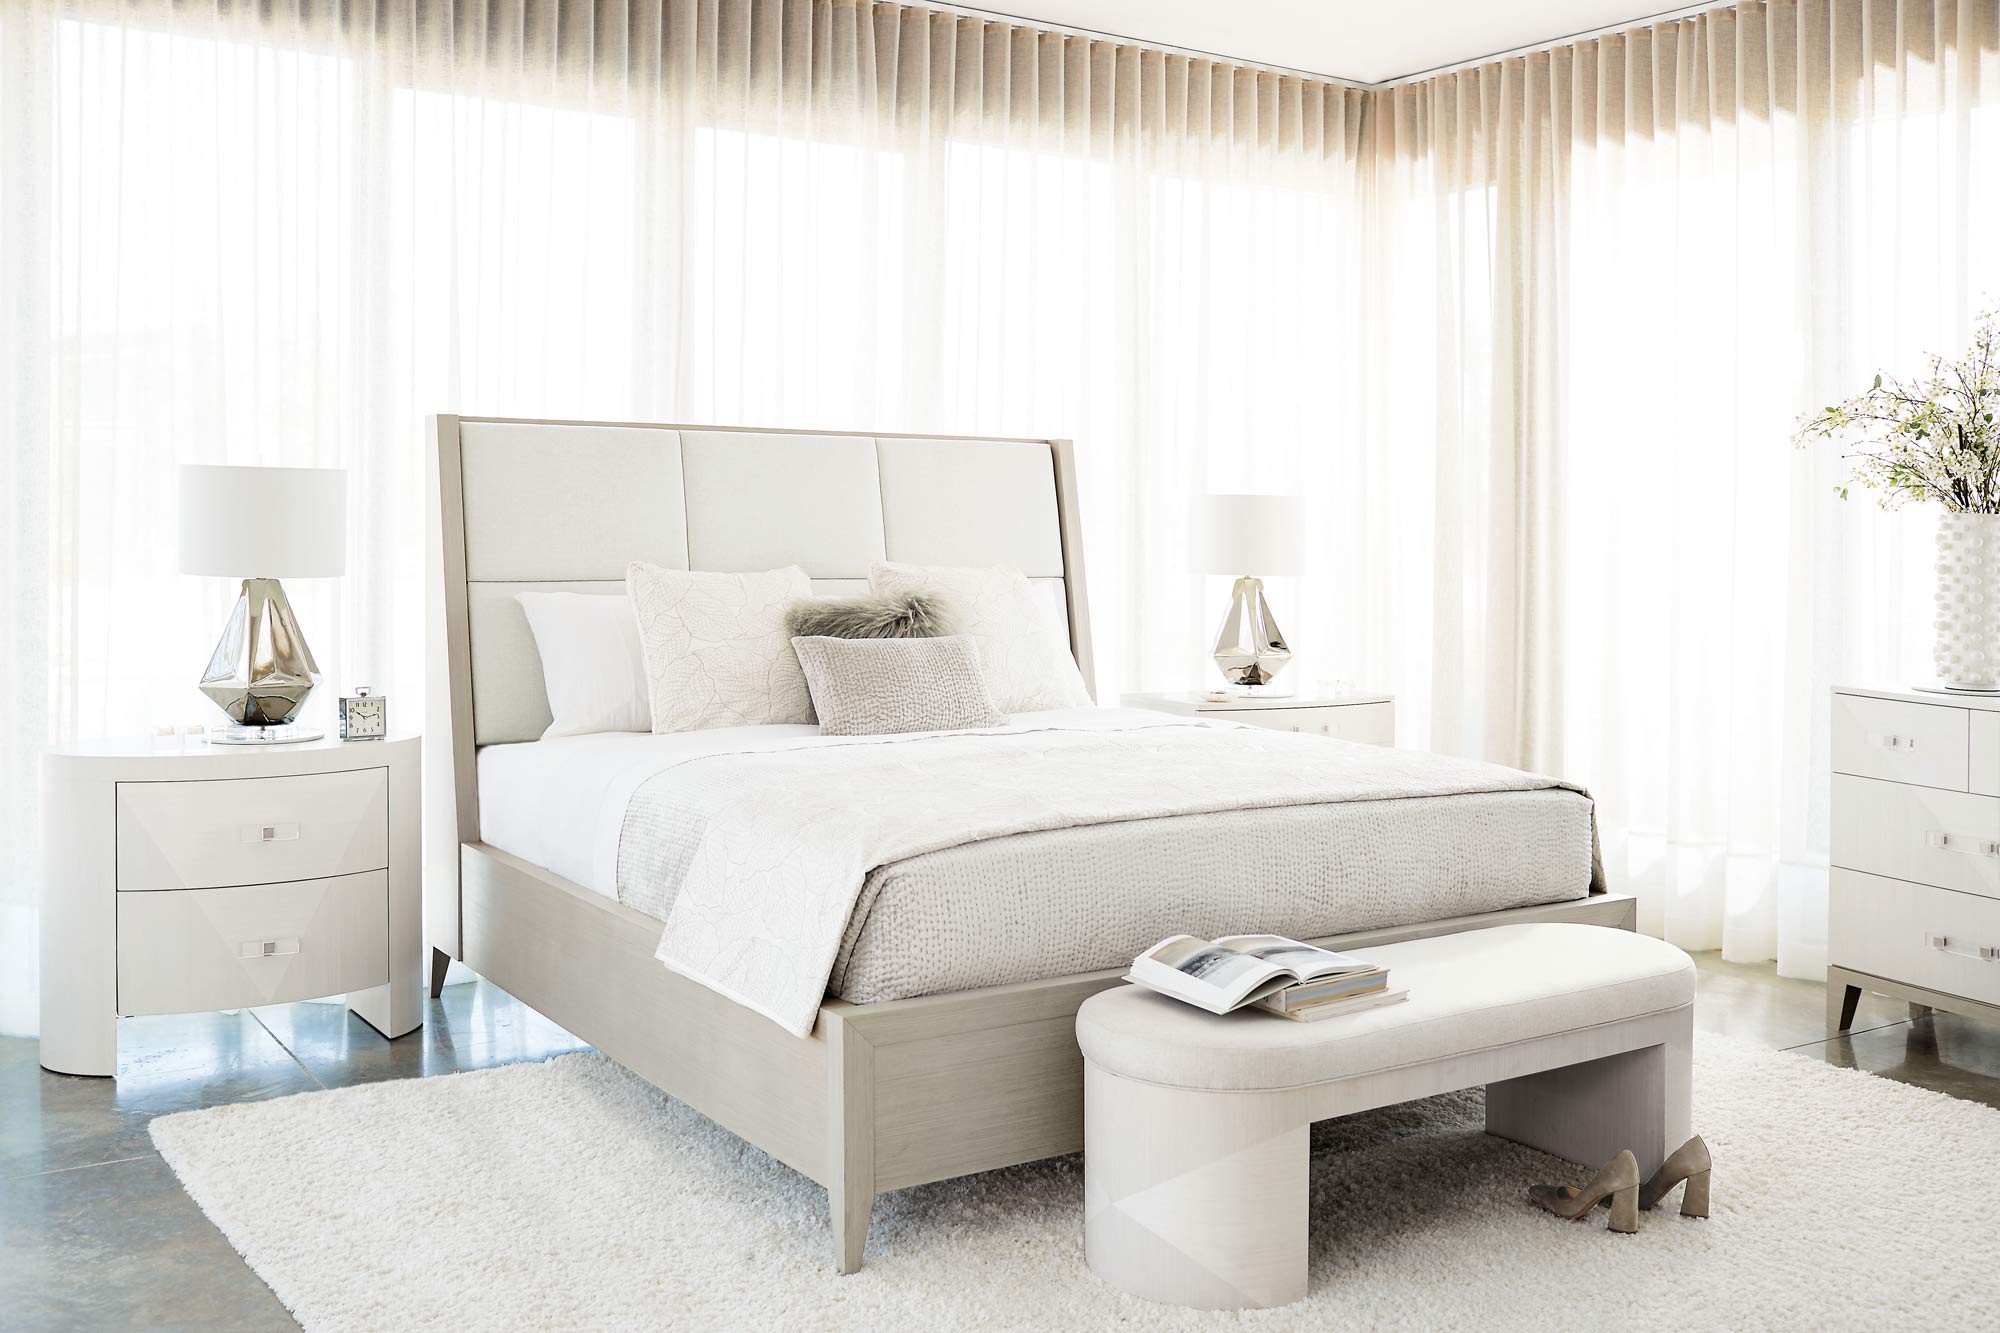 Already going crazy for this Bernhardt Axiom bedroom collection -- Cannot wait to see it in person!